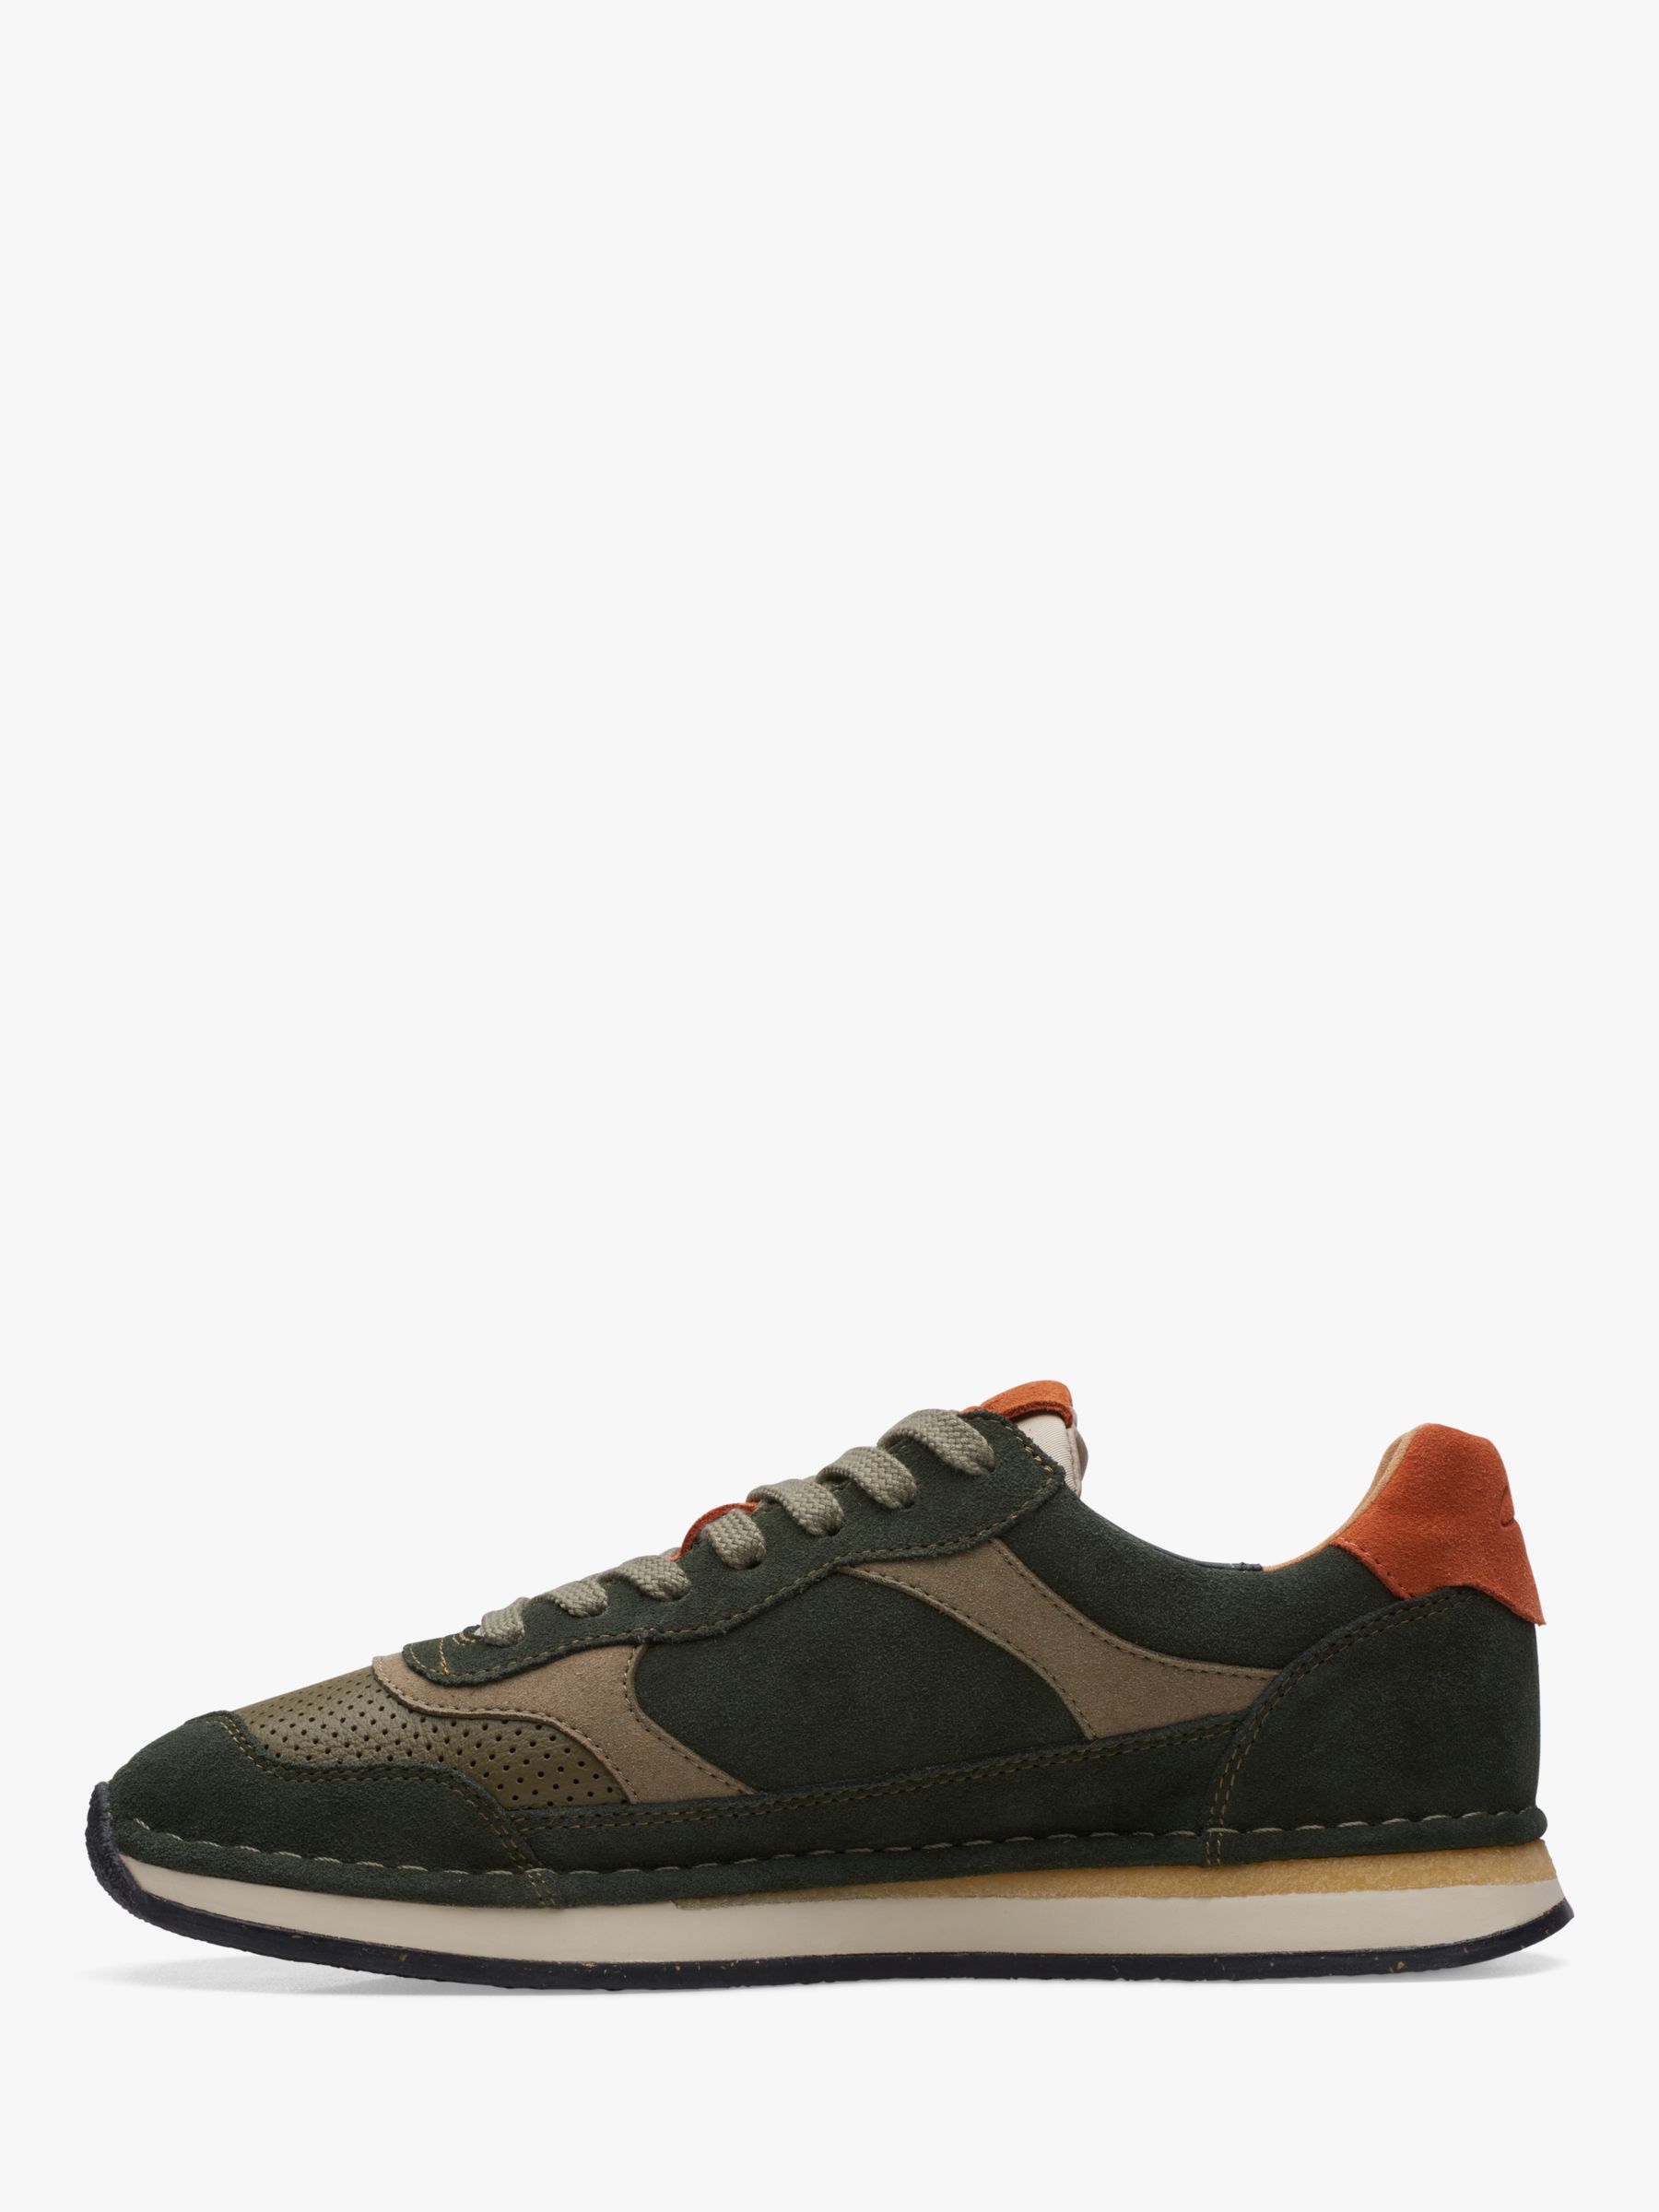 Clarks Craft Run Tor Trainers, Olive at John Lewis & Partners